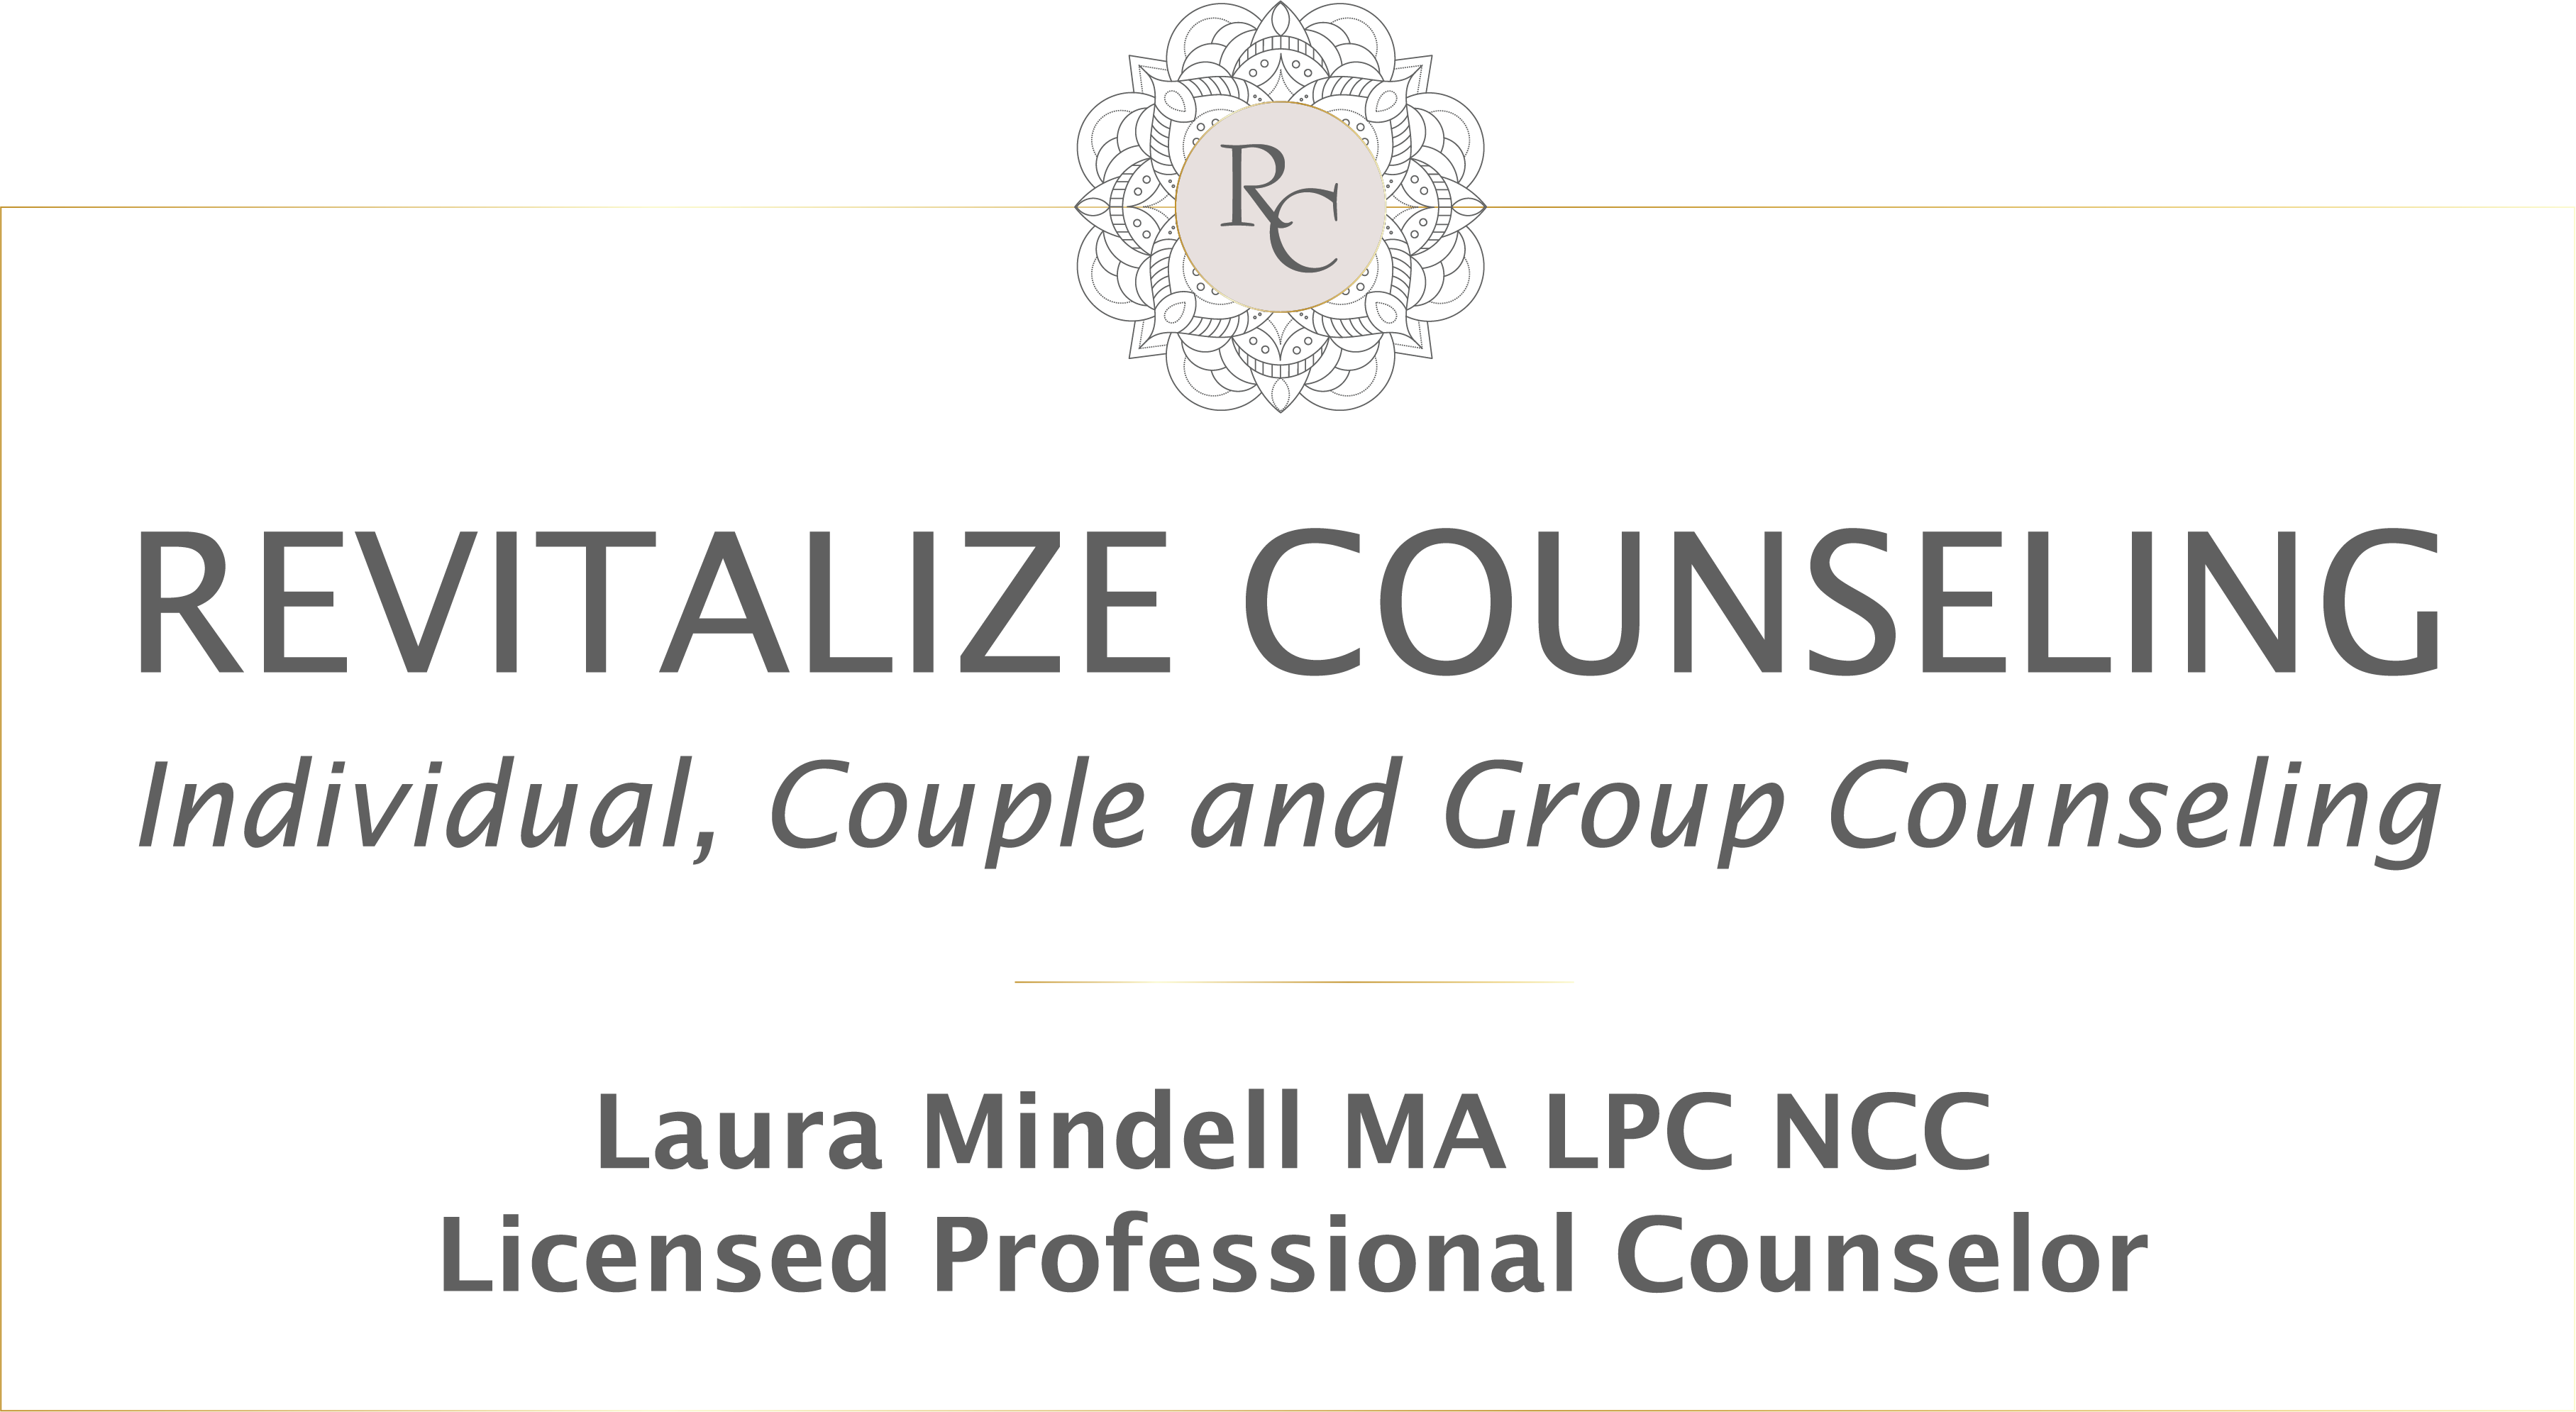 Revitalize Counseling